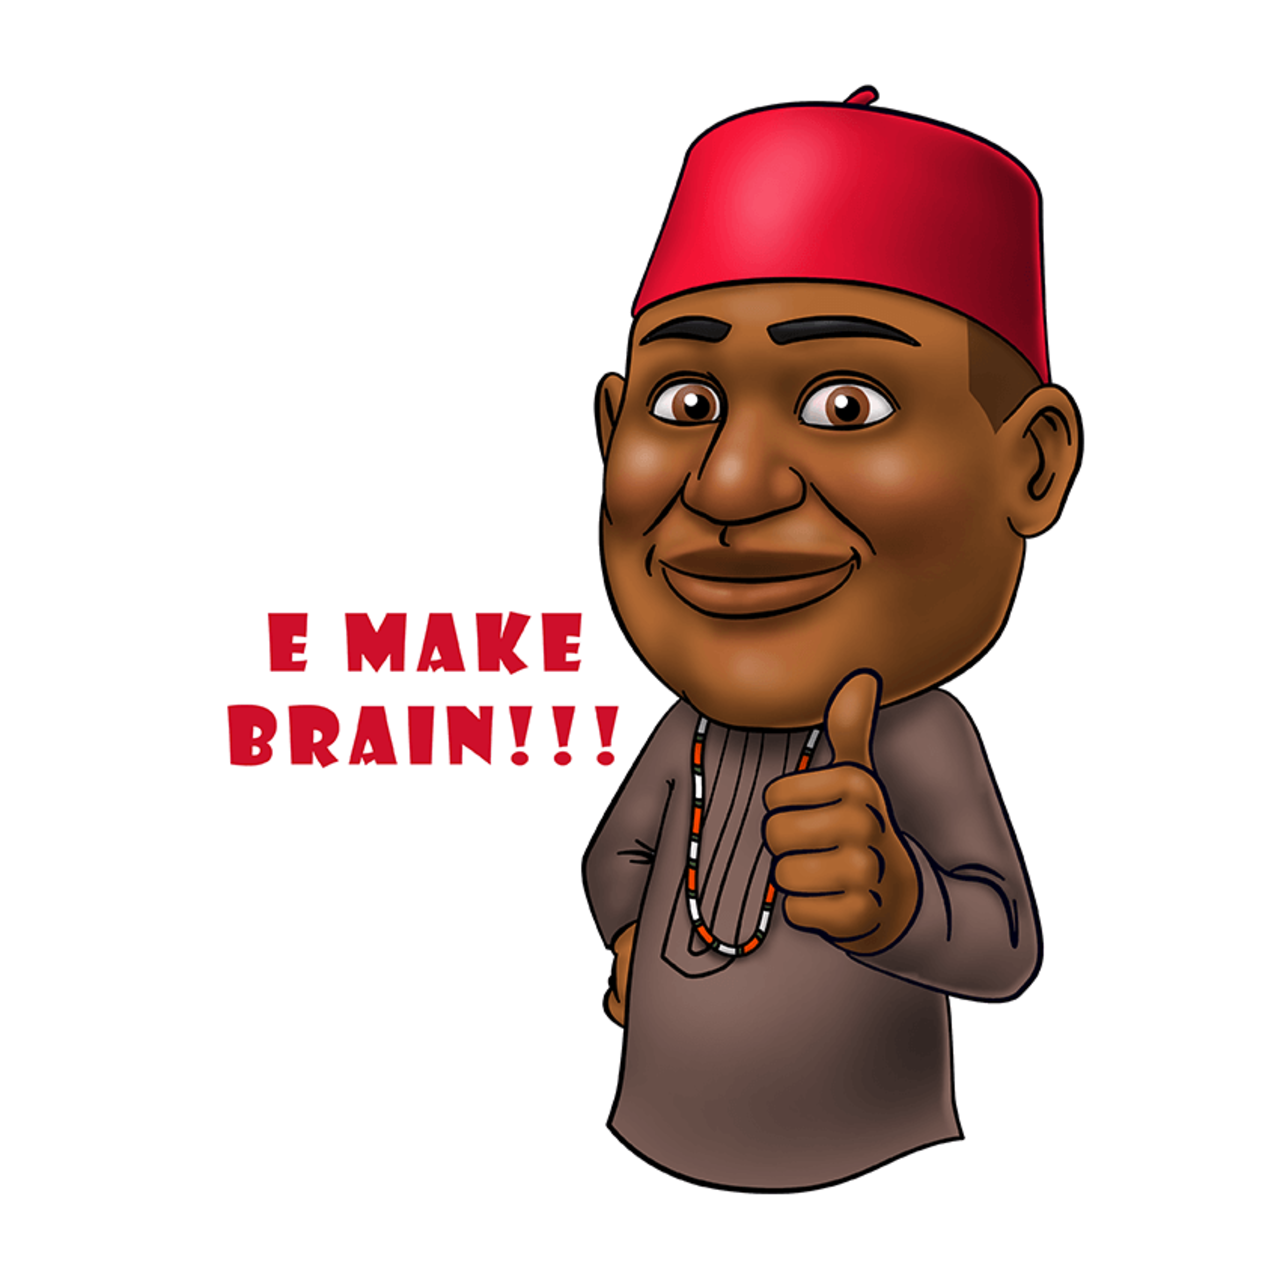 <a href="http://www.afroemoji.com/" target="_blank" target="_blank">Afro Emoji </a>has launched. The app includes sticker characters with a range of African phrases and captions. They can be fully customized by users for their preferred language.